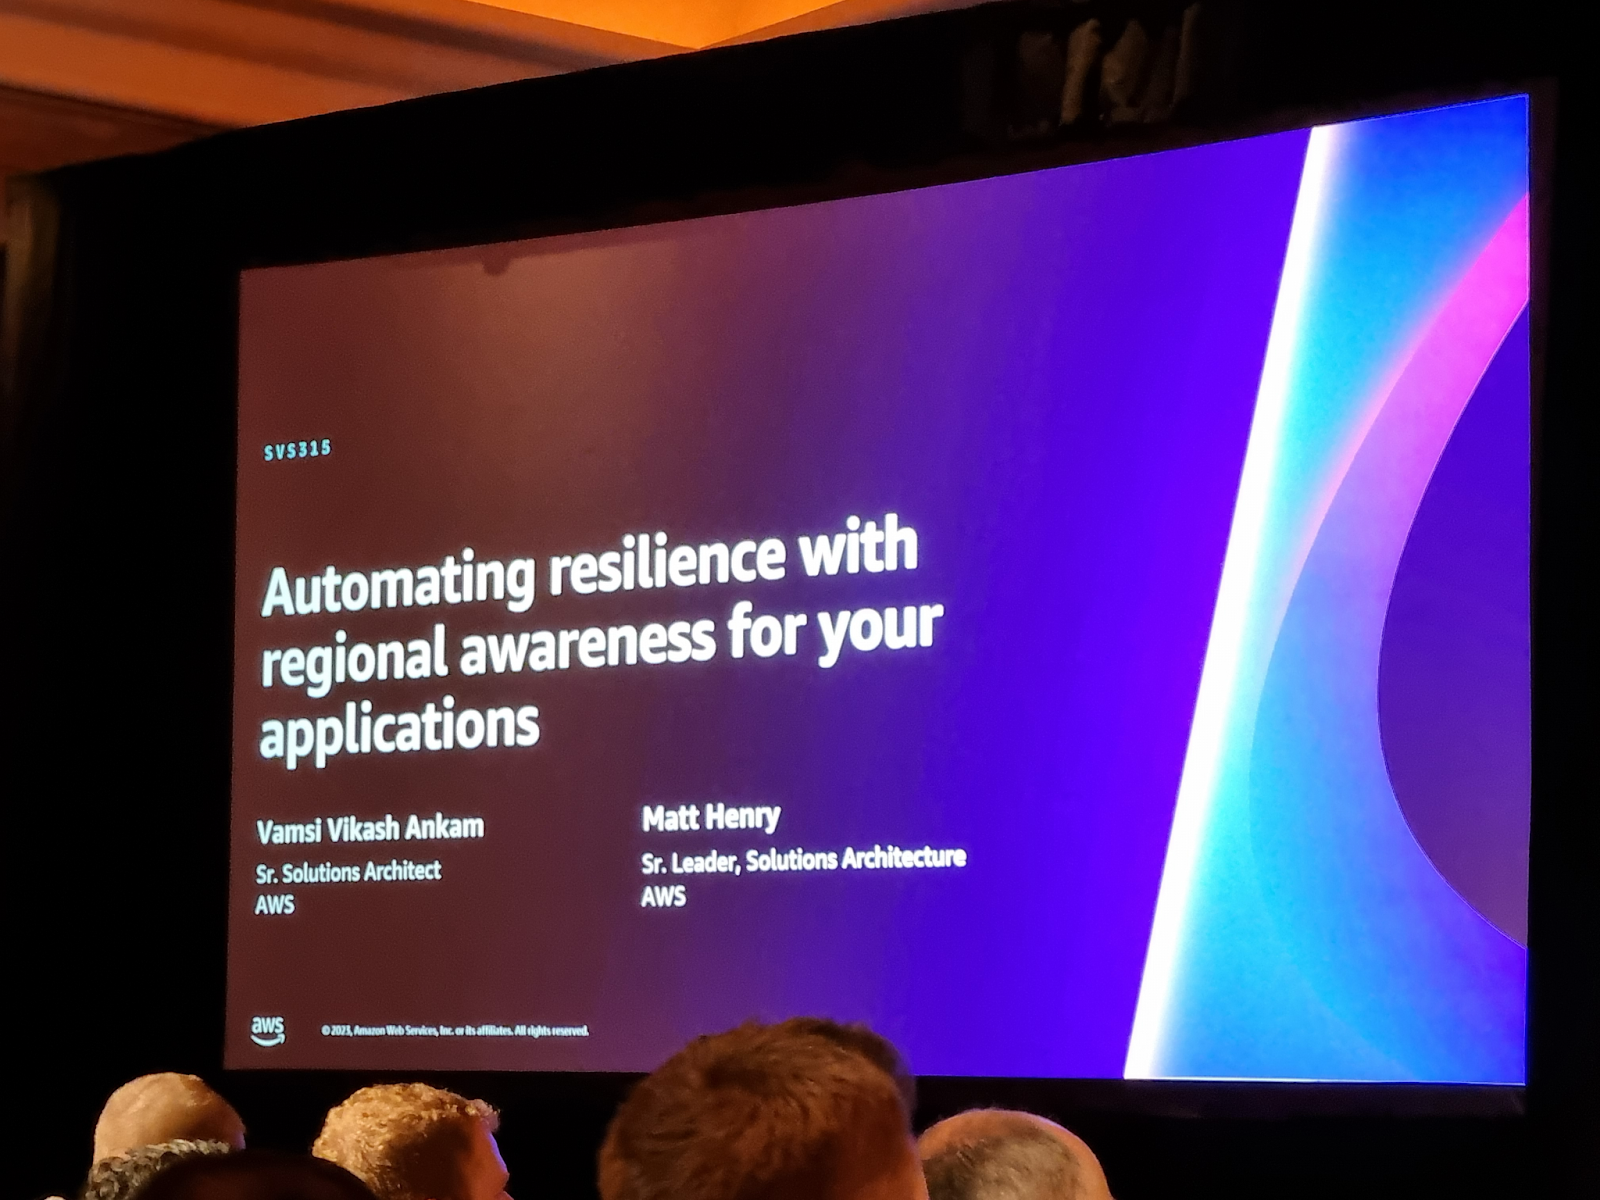 Automating resilience with regional awareness for your applications